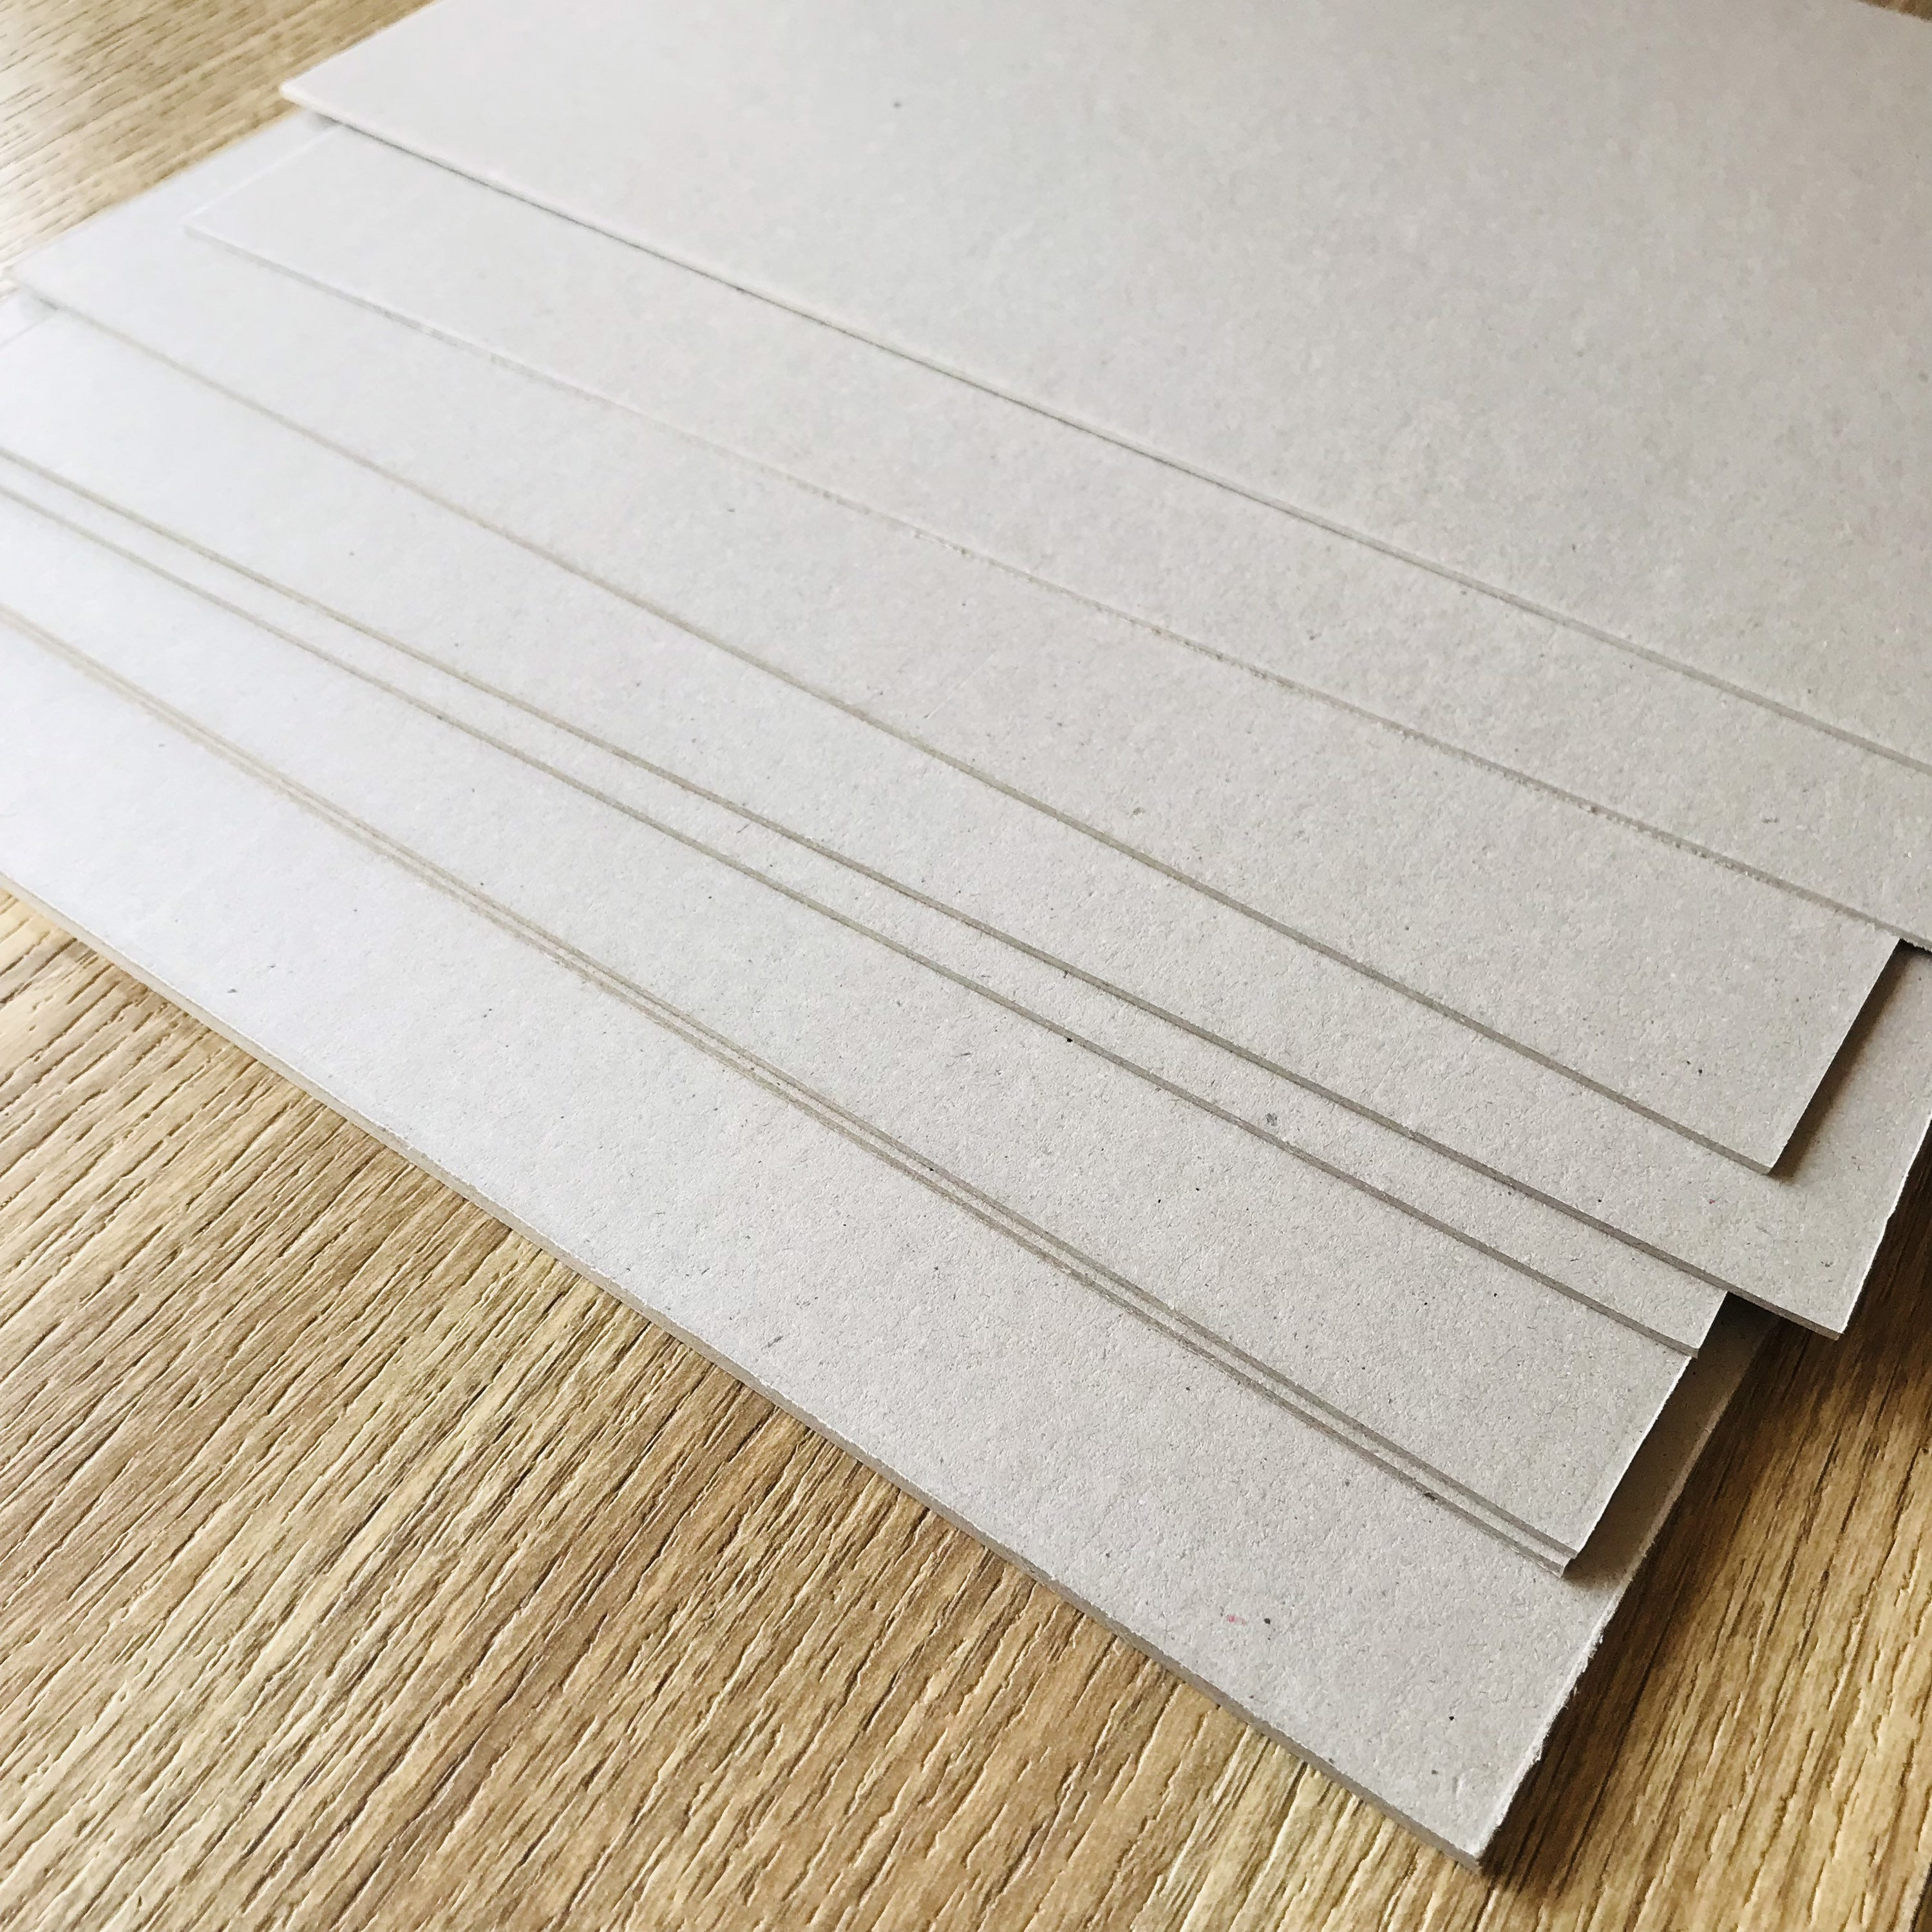 1.5mm 2mm 2.5mm Laminated Chip Board Grey Cardboard with Round Corner for  Puzzle